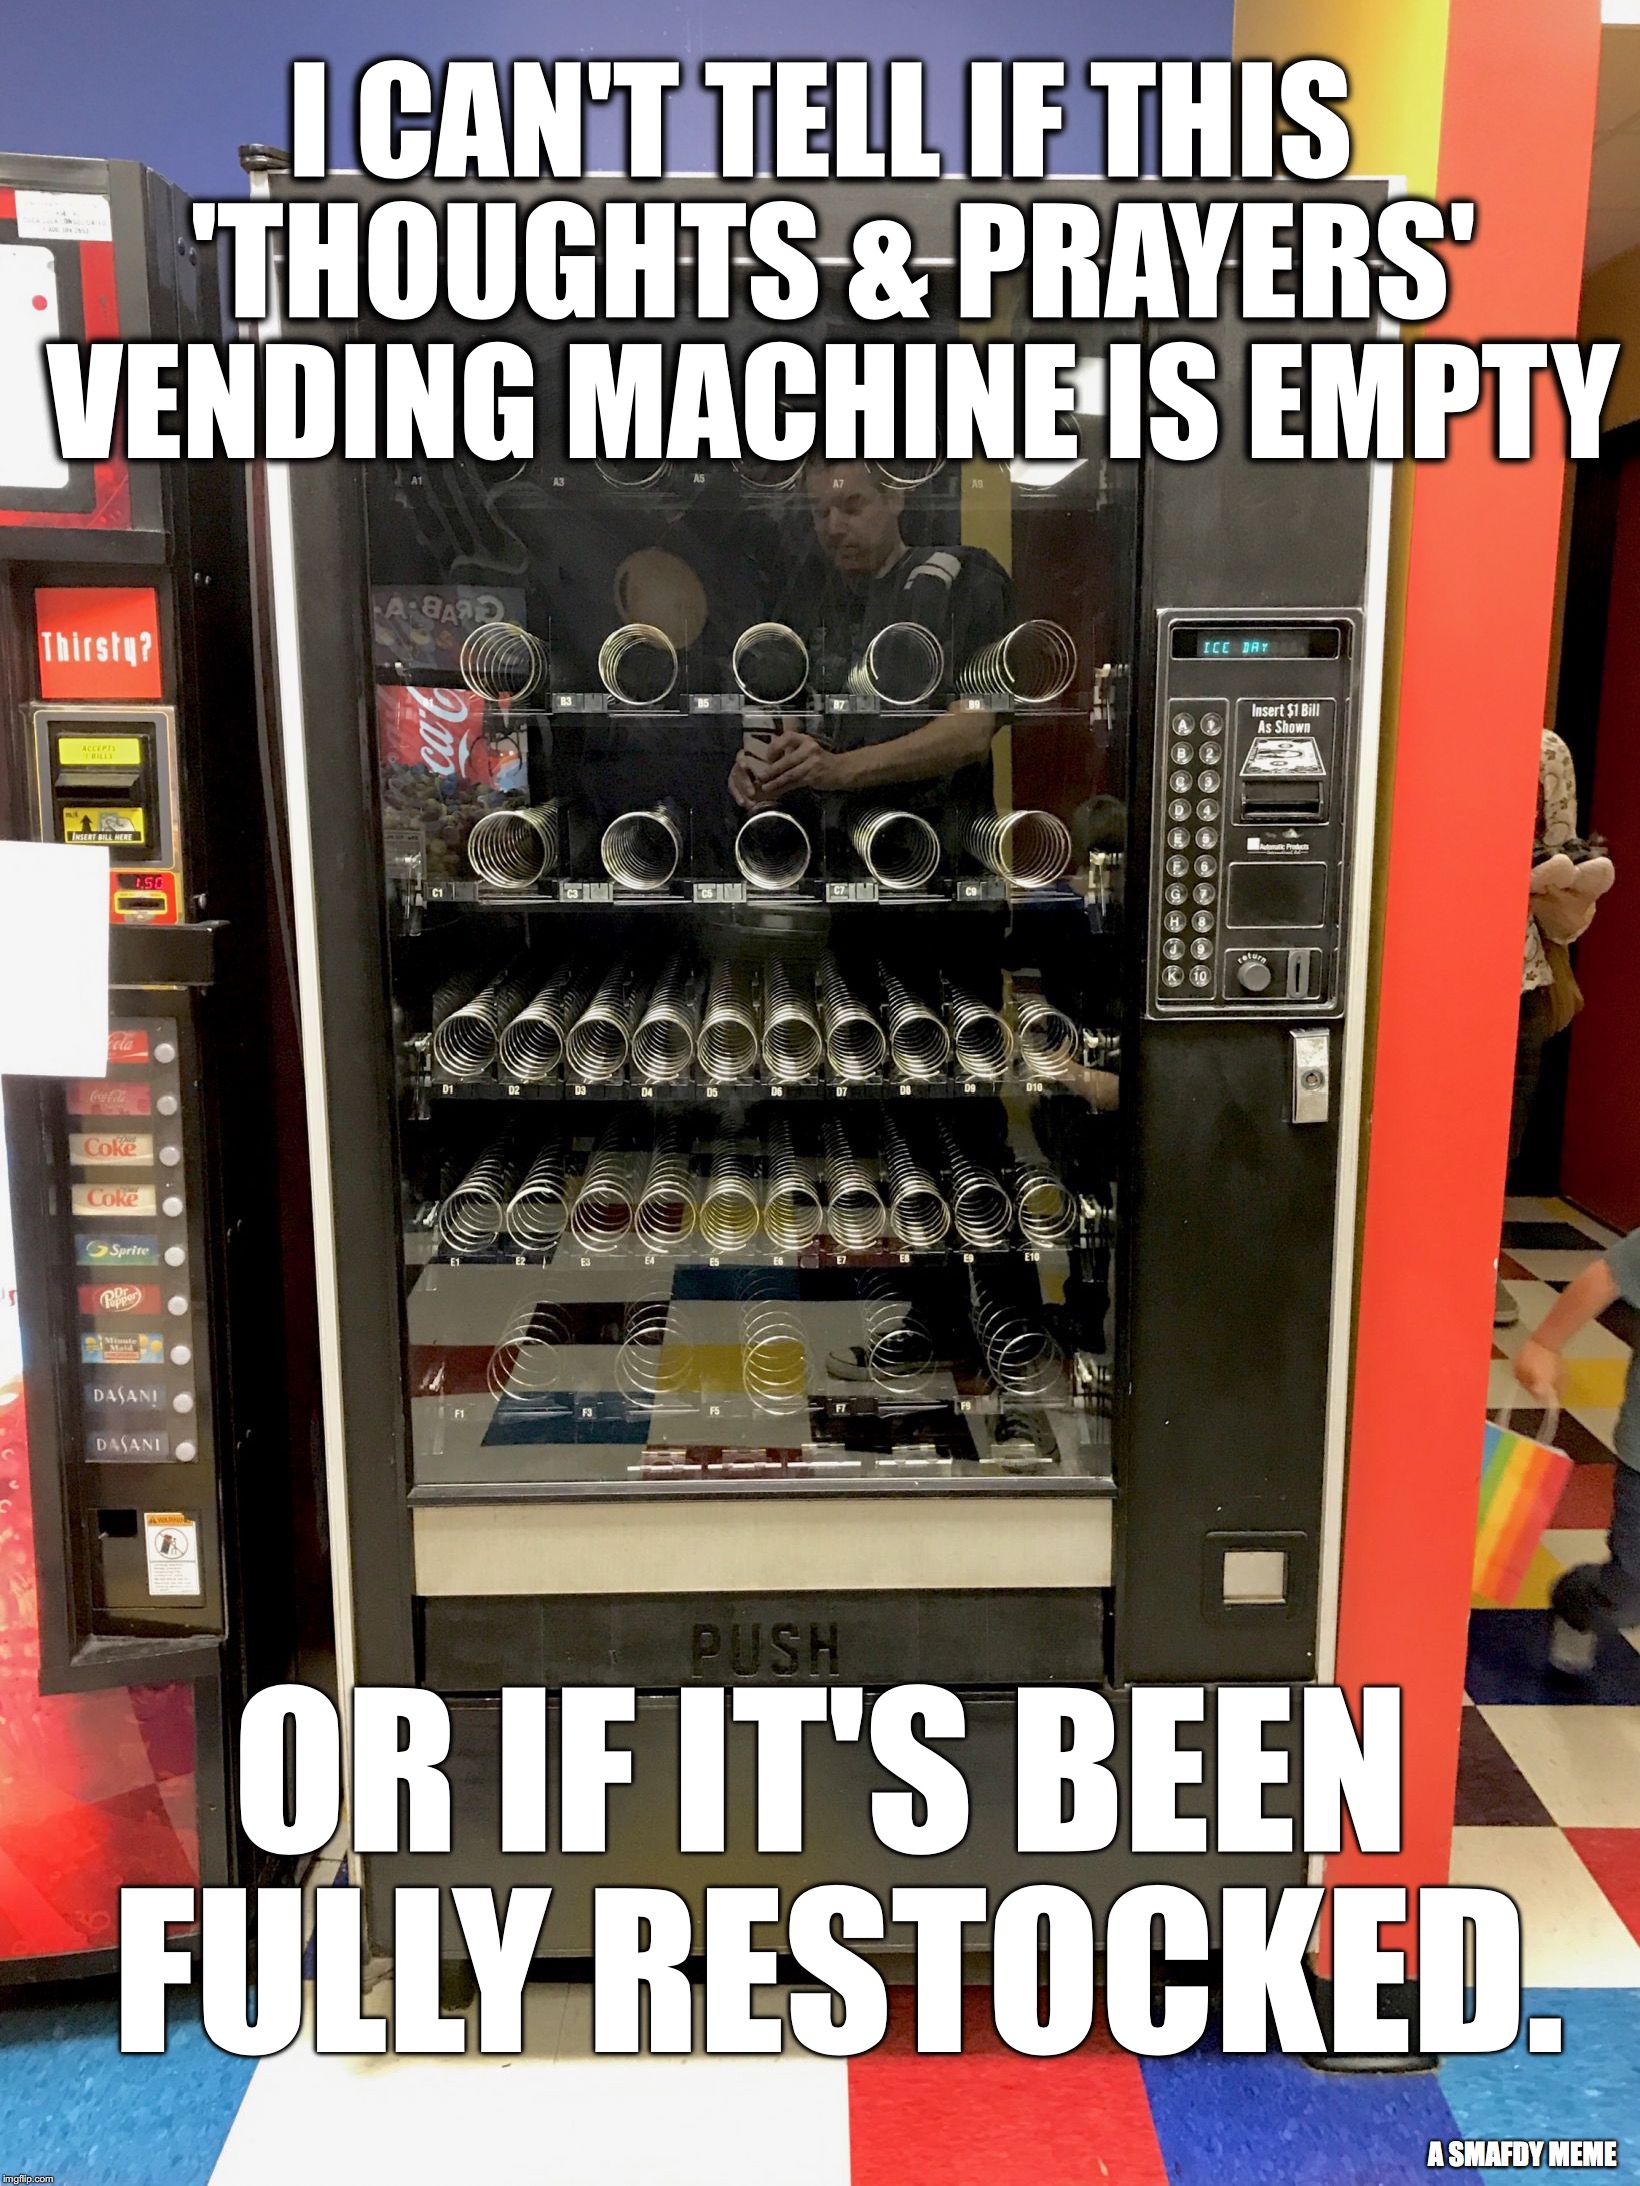 I CAN'T TELL IF THIS 'THOUGHTS & PRAYERS' VENDING MACHINE IS EMPTY; OR IF IT'S BEEN FULLY RESTOCKED. A SMAFDY MEME | image tagged in vending machine | made w/ Imgflip meme maker